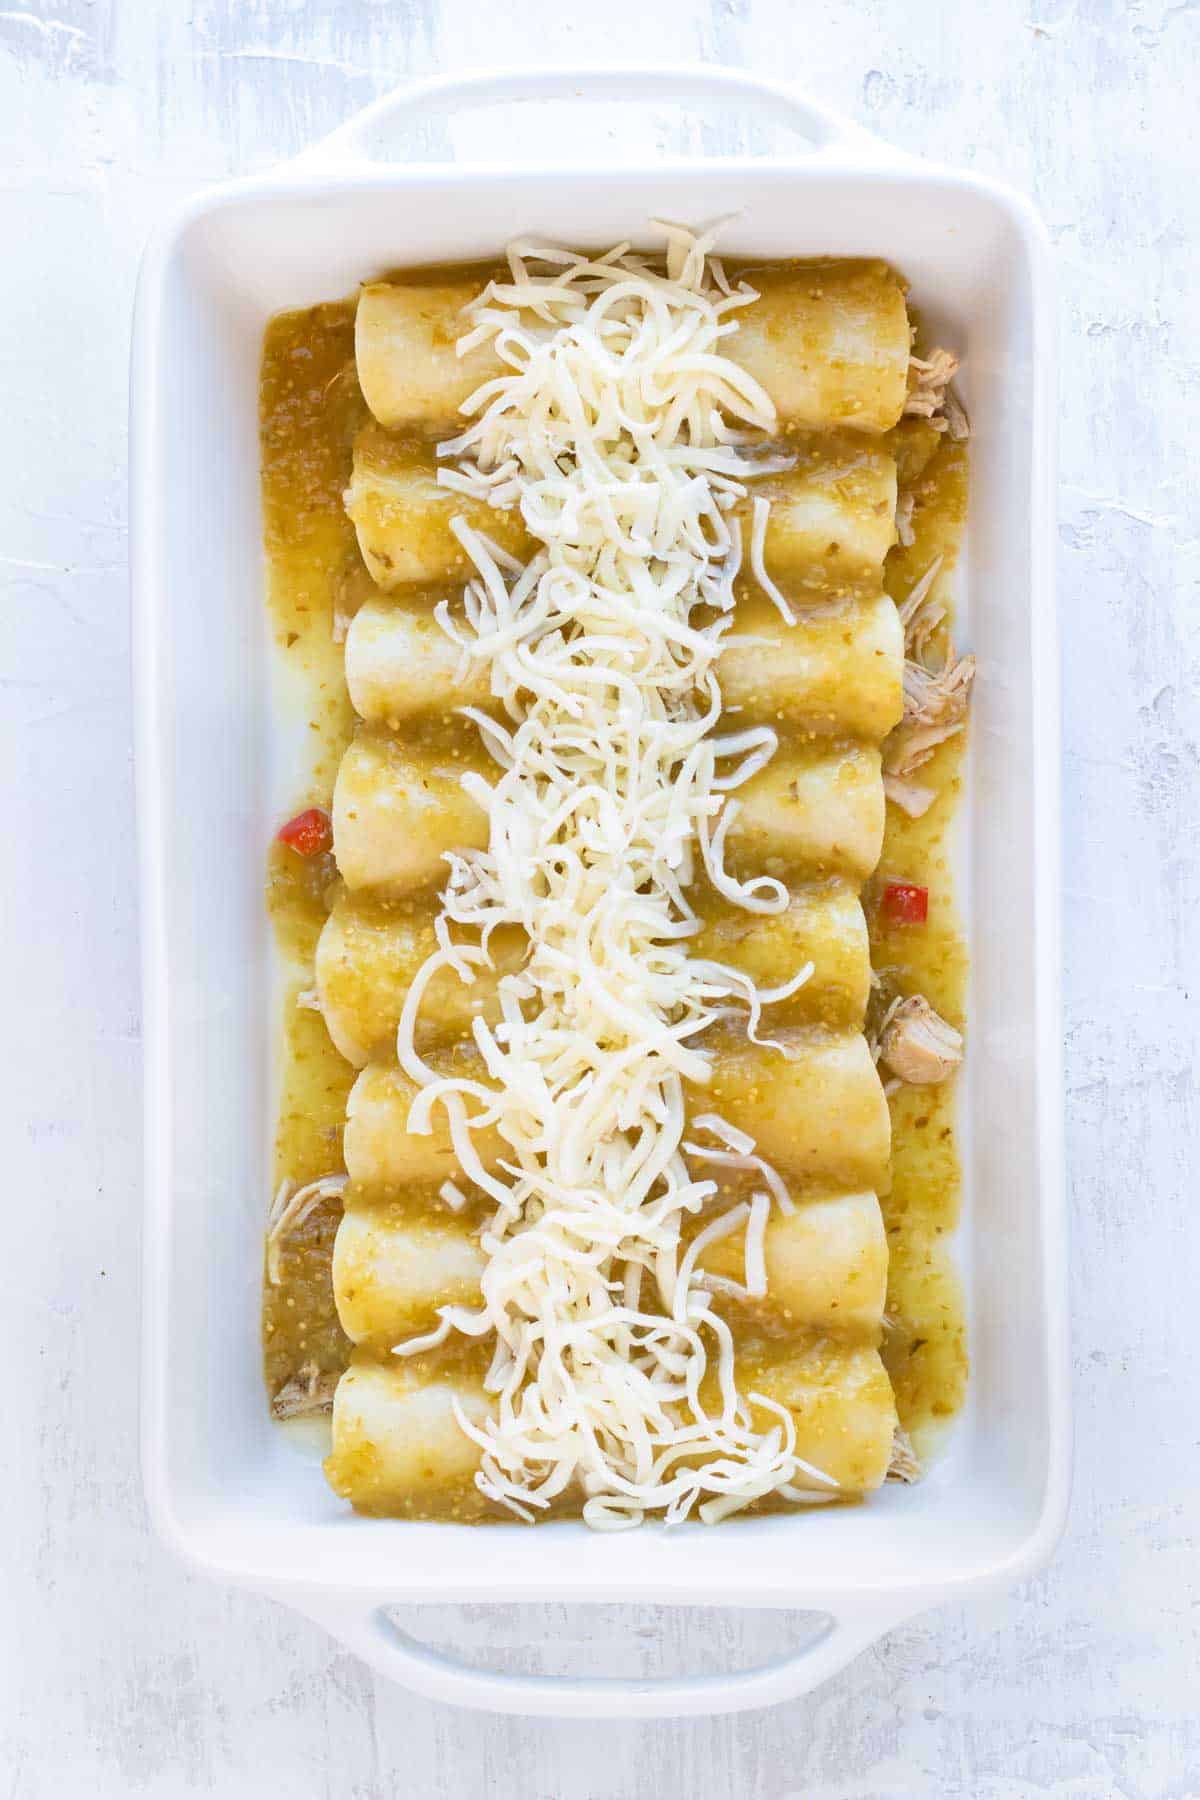 Enchiladas are covered with sauce and cheese before baking.